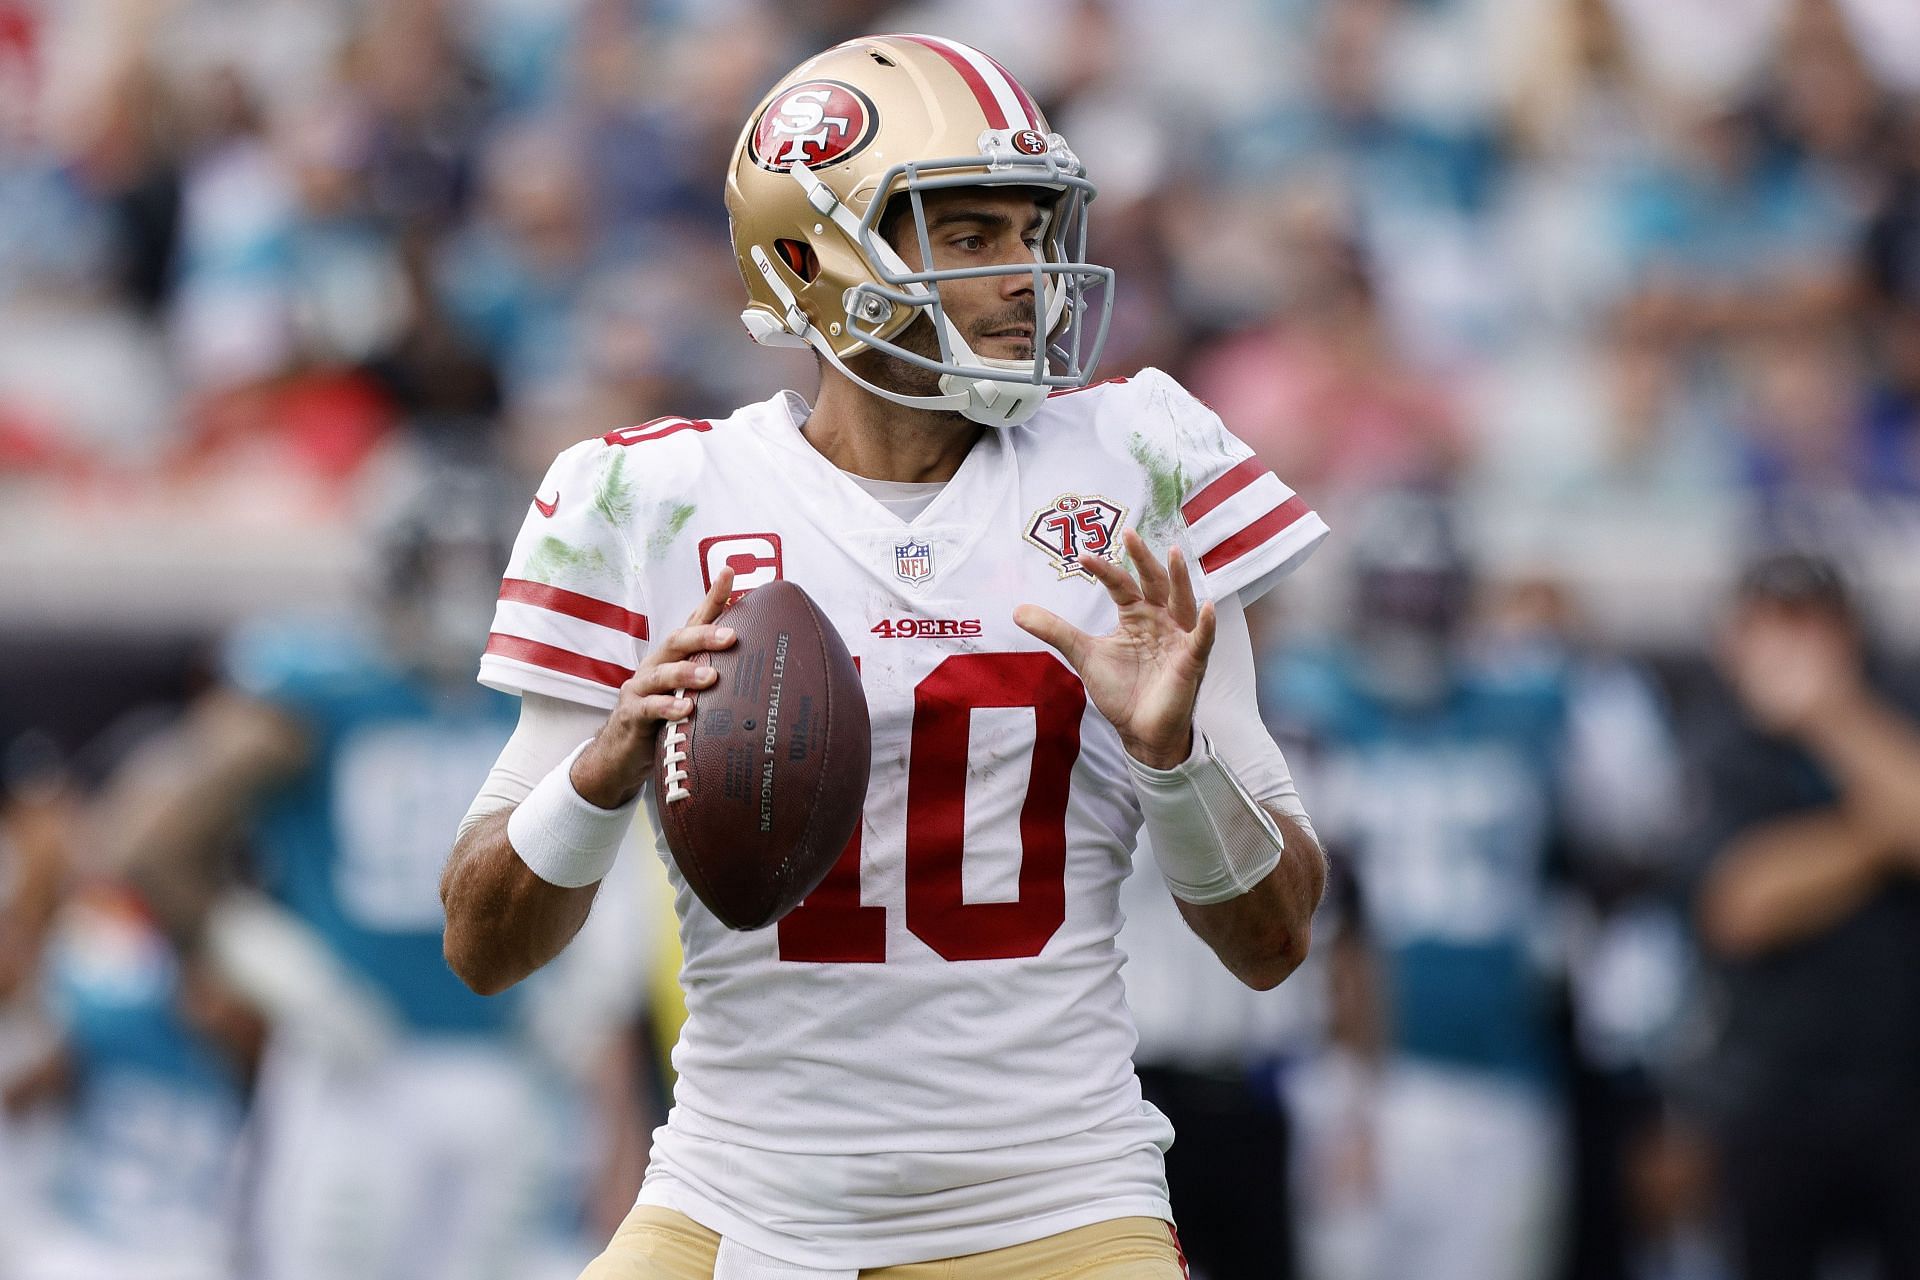 The Falcons need to make the move for Jimmy Garoppolo